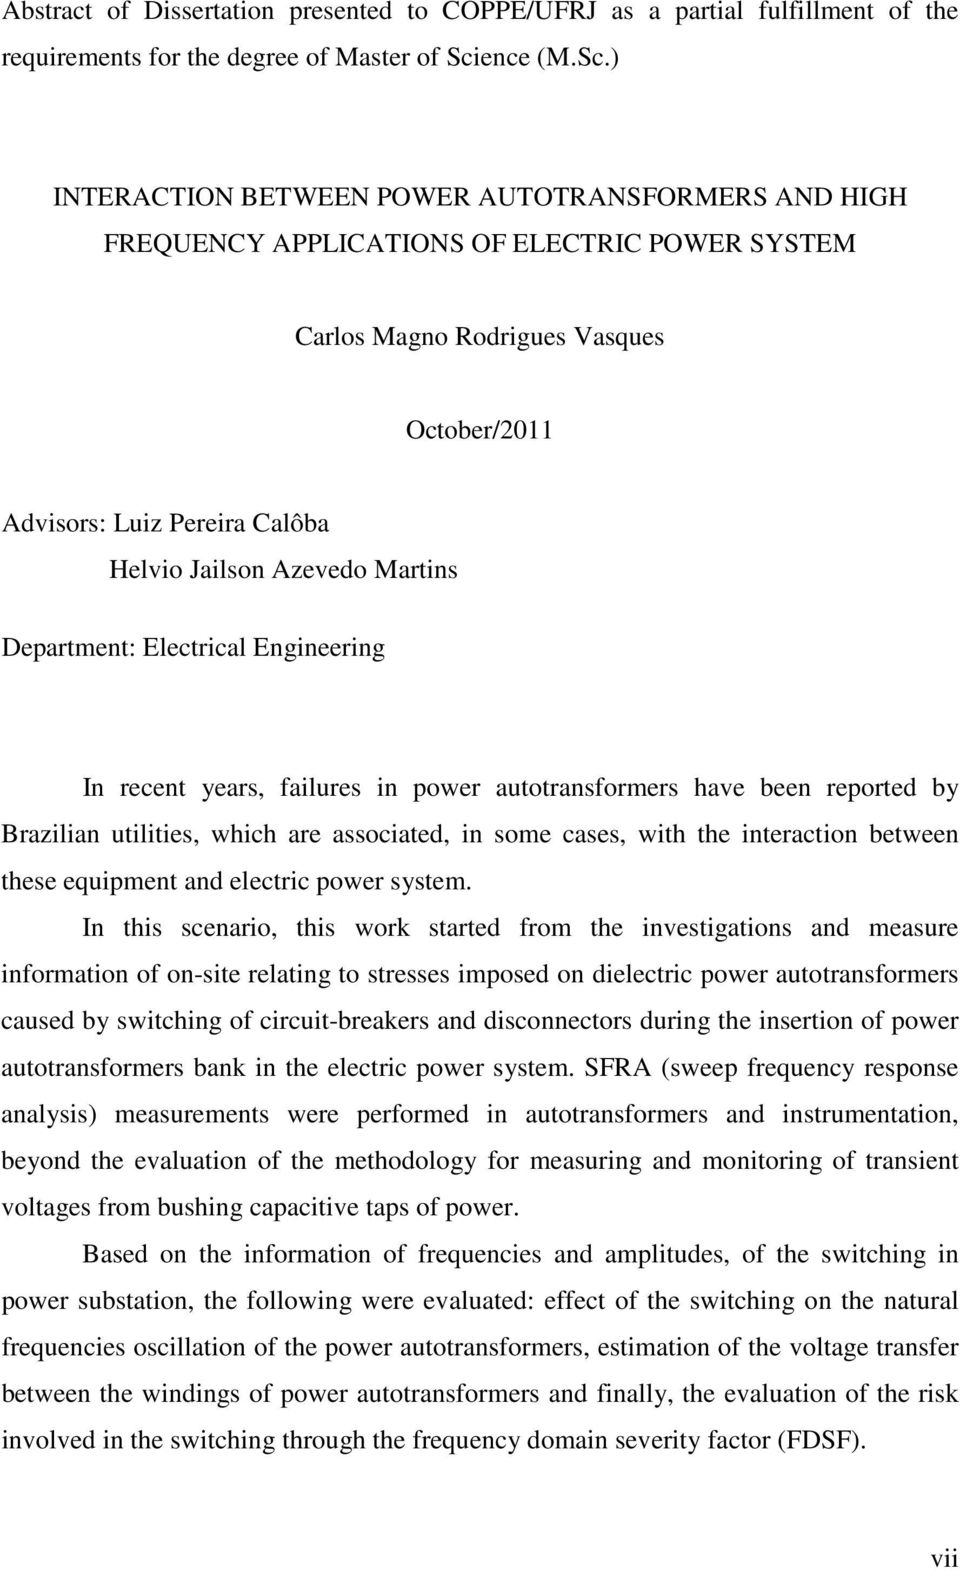 ) INTERACTION BETWEEN POWER AUTOTRANSFORMERS AND HIGH FREQUENCY APPLICATIONS OF ELECTRIC POWER SYSTEM Carlos Magno Rodrigues Vasques October/2011 Advisors: Luiz Pereira Calôba Helvio Jailson Azevedo